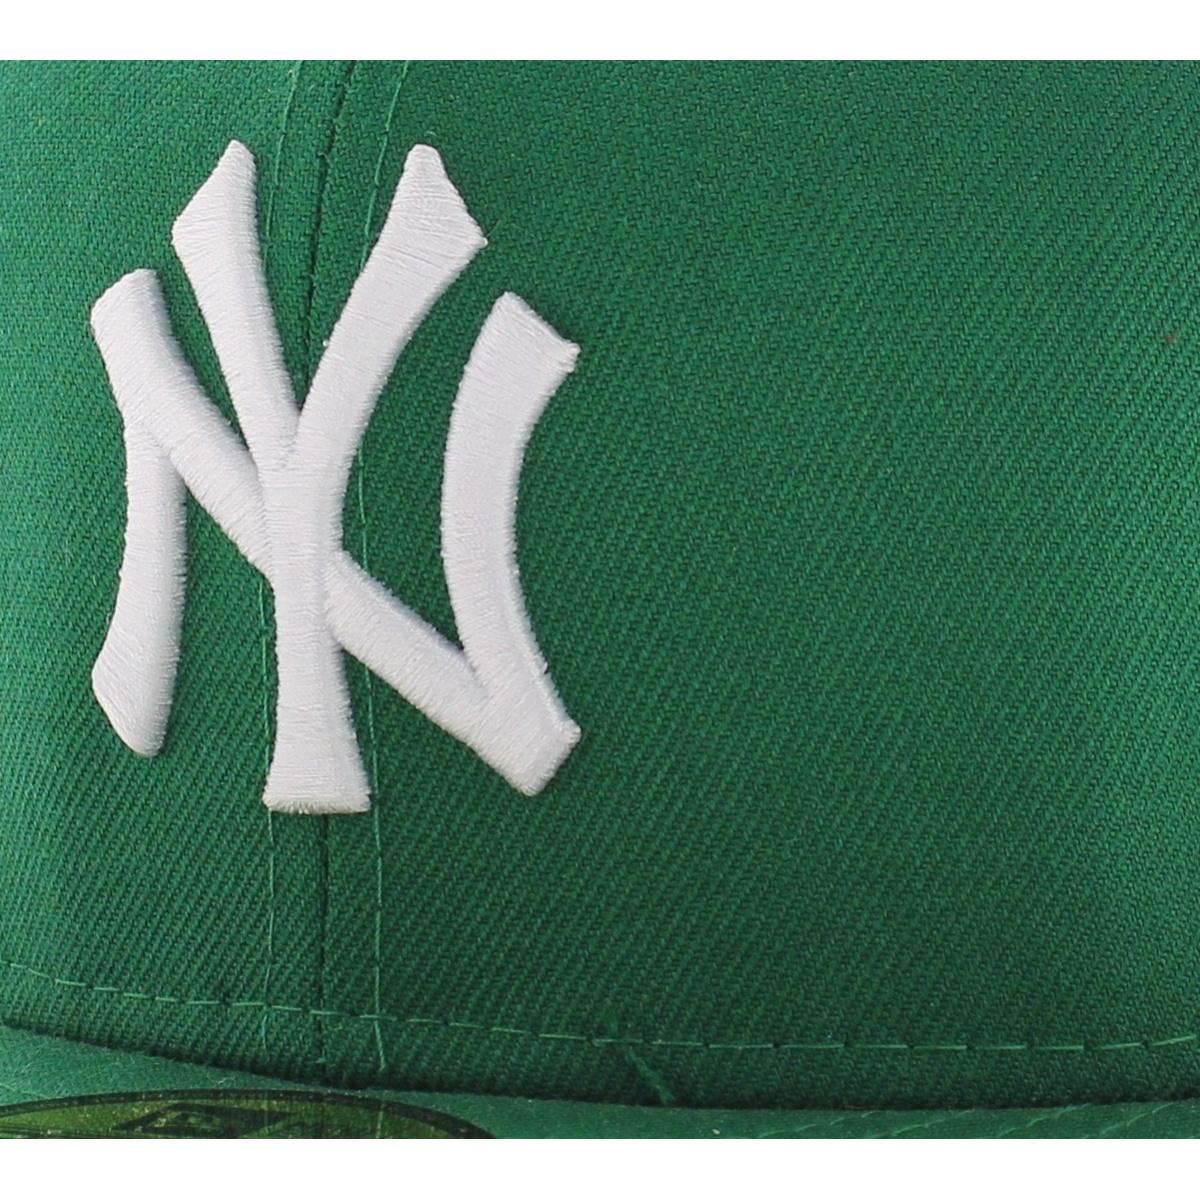 casquette visière plate ny - Achat casquette new era Reference : 2191